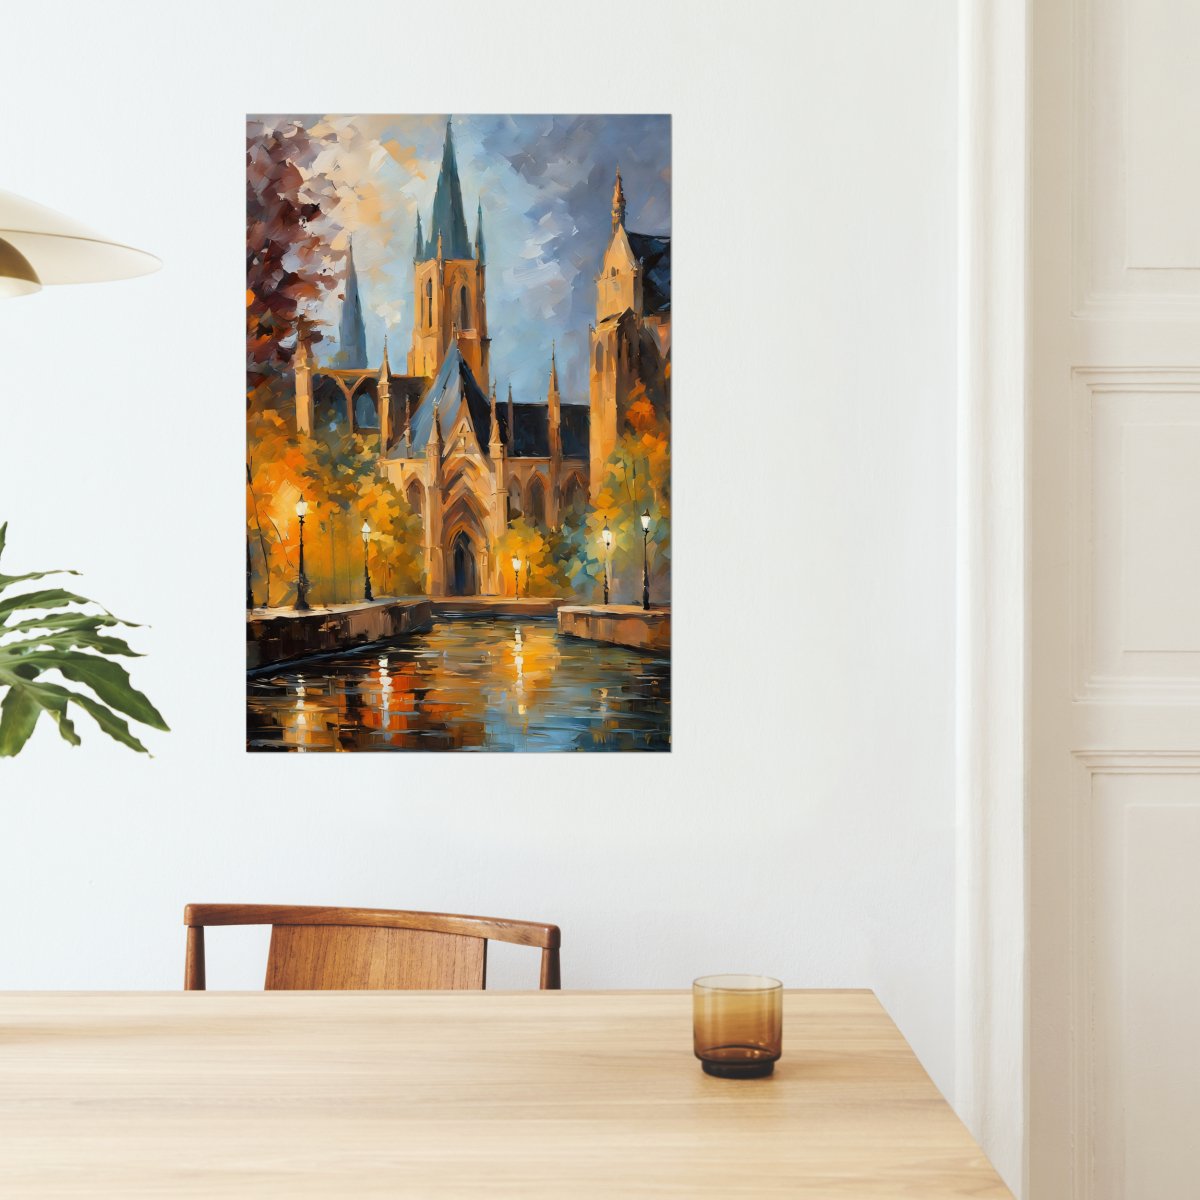 Cologne cathedral - Art print - Poster - Ever colorful